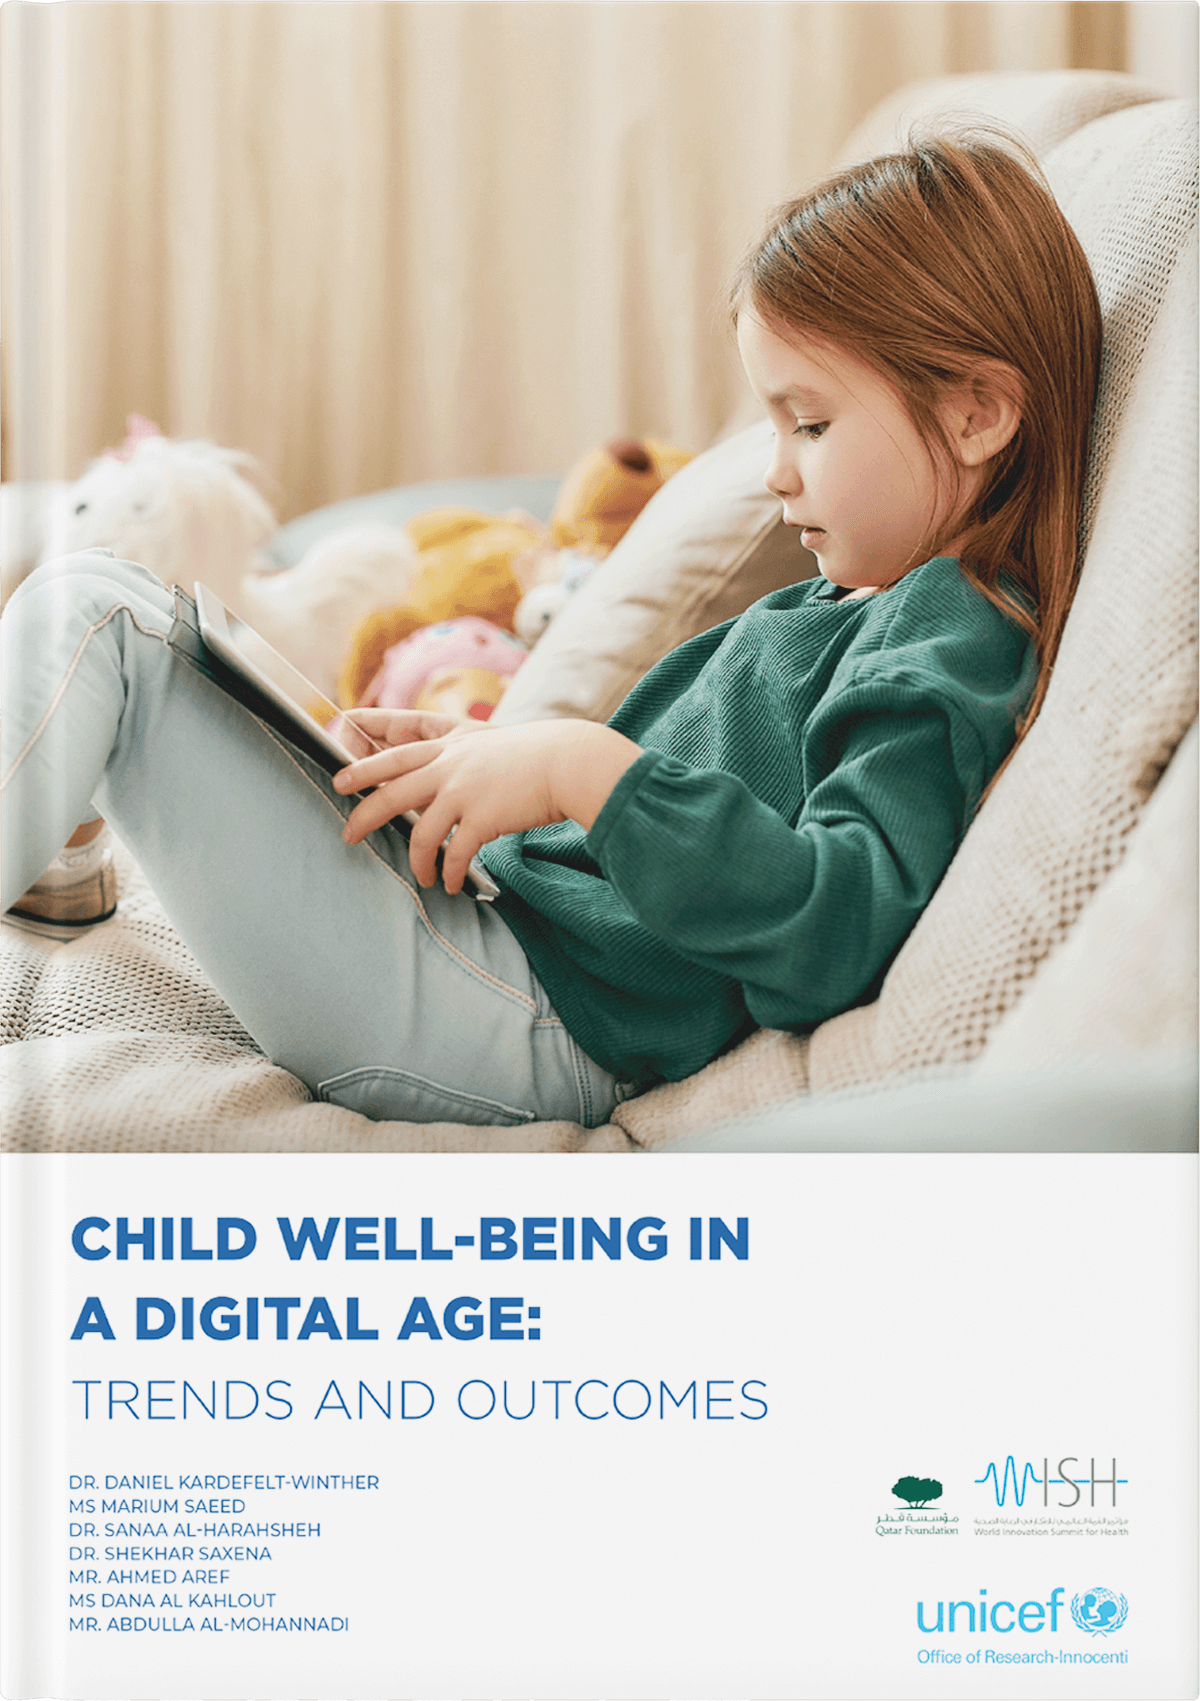 Child wellbeing in a digital age